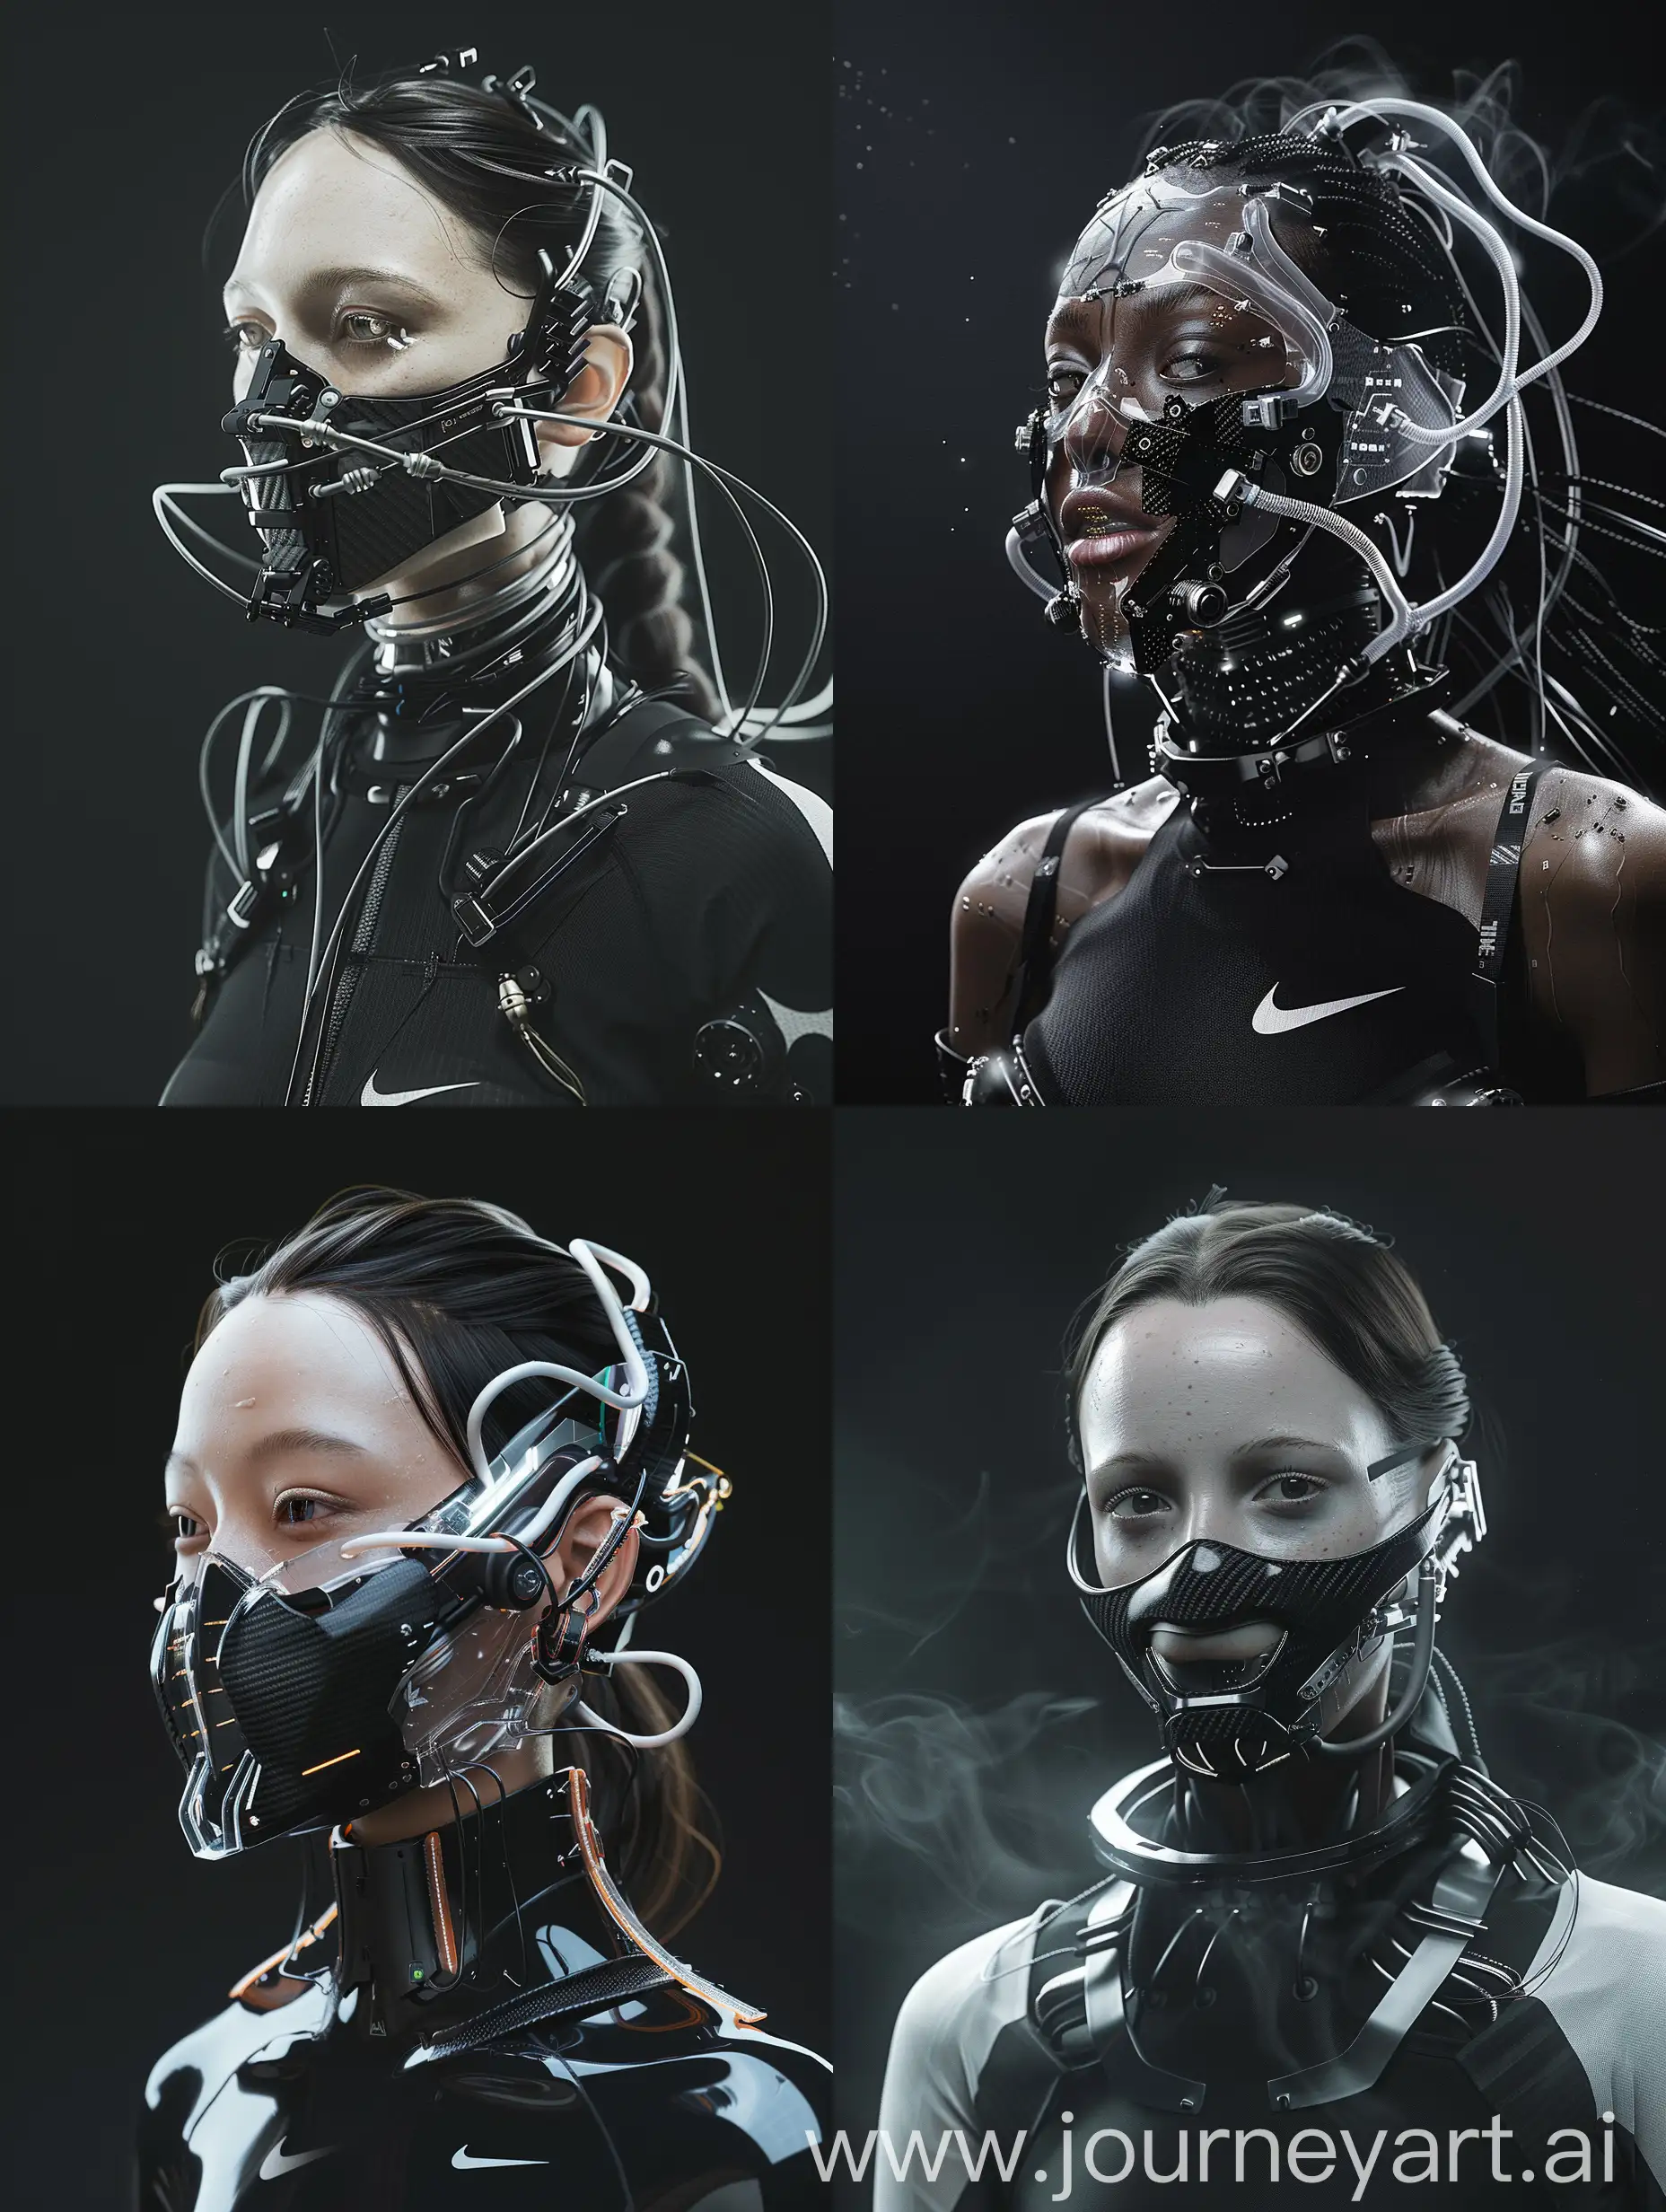 Against a sleek black backdrop, witness the captivating presence of a Beautiful character adorned with a cybernetic mouth-covering mask. It seamlessly merges cutting-edge technology with intricate details, showcasing carbon fiber textures, sleek aluminum accents, glass details and wires. Symbolizing the delicate equilibrium between humanity and machine, her appearance embodies the essence of a futuristic cyberpunk aesthetic, further accentuated by Nike-inspired add-ons. With dynamic movements reminiscent of action-packed film sequences, accompanied by cinematic haze and an electric energy, she exudes an irresistible allure that commands attention.v3